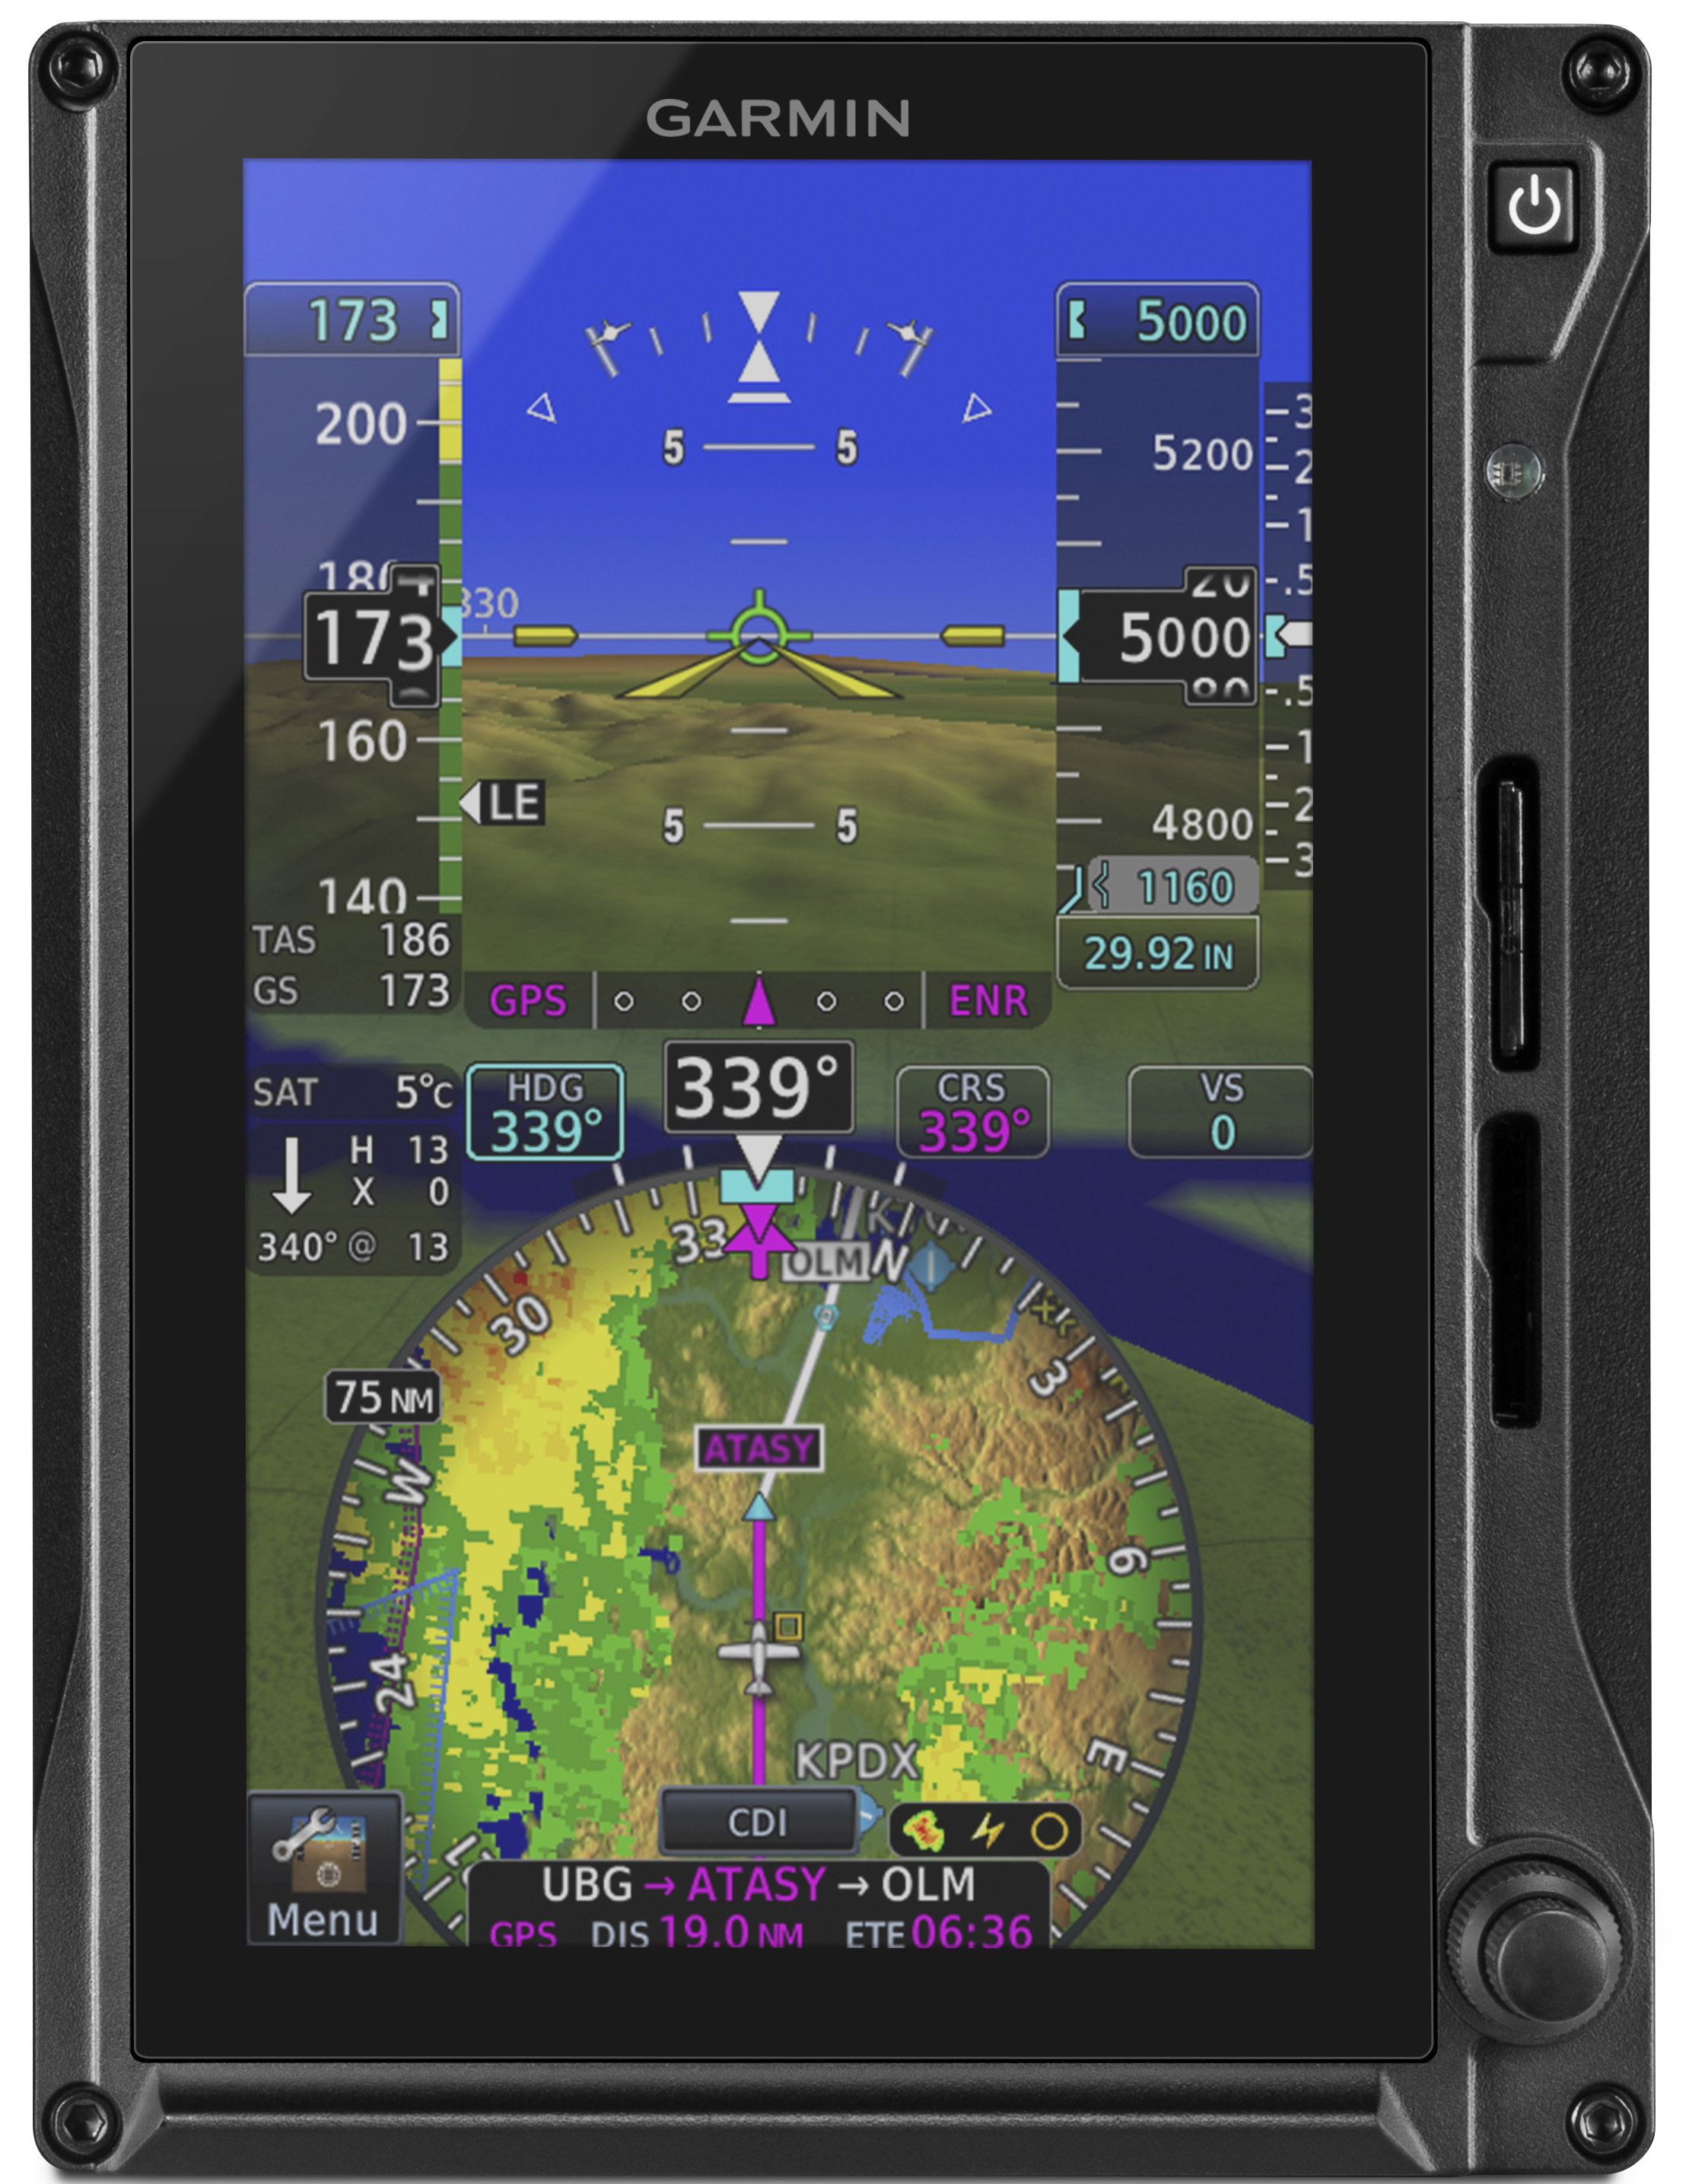 The Garmin G600 Txi with 7-inch portrait display can be used as a primary flight display or multifunction display, or as an engine information system. Image courtesy of Garmin.